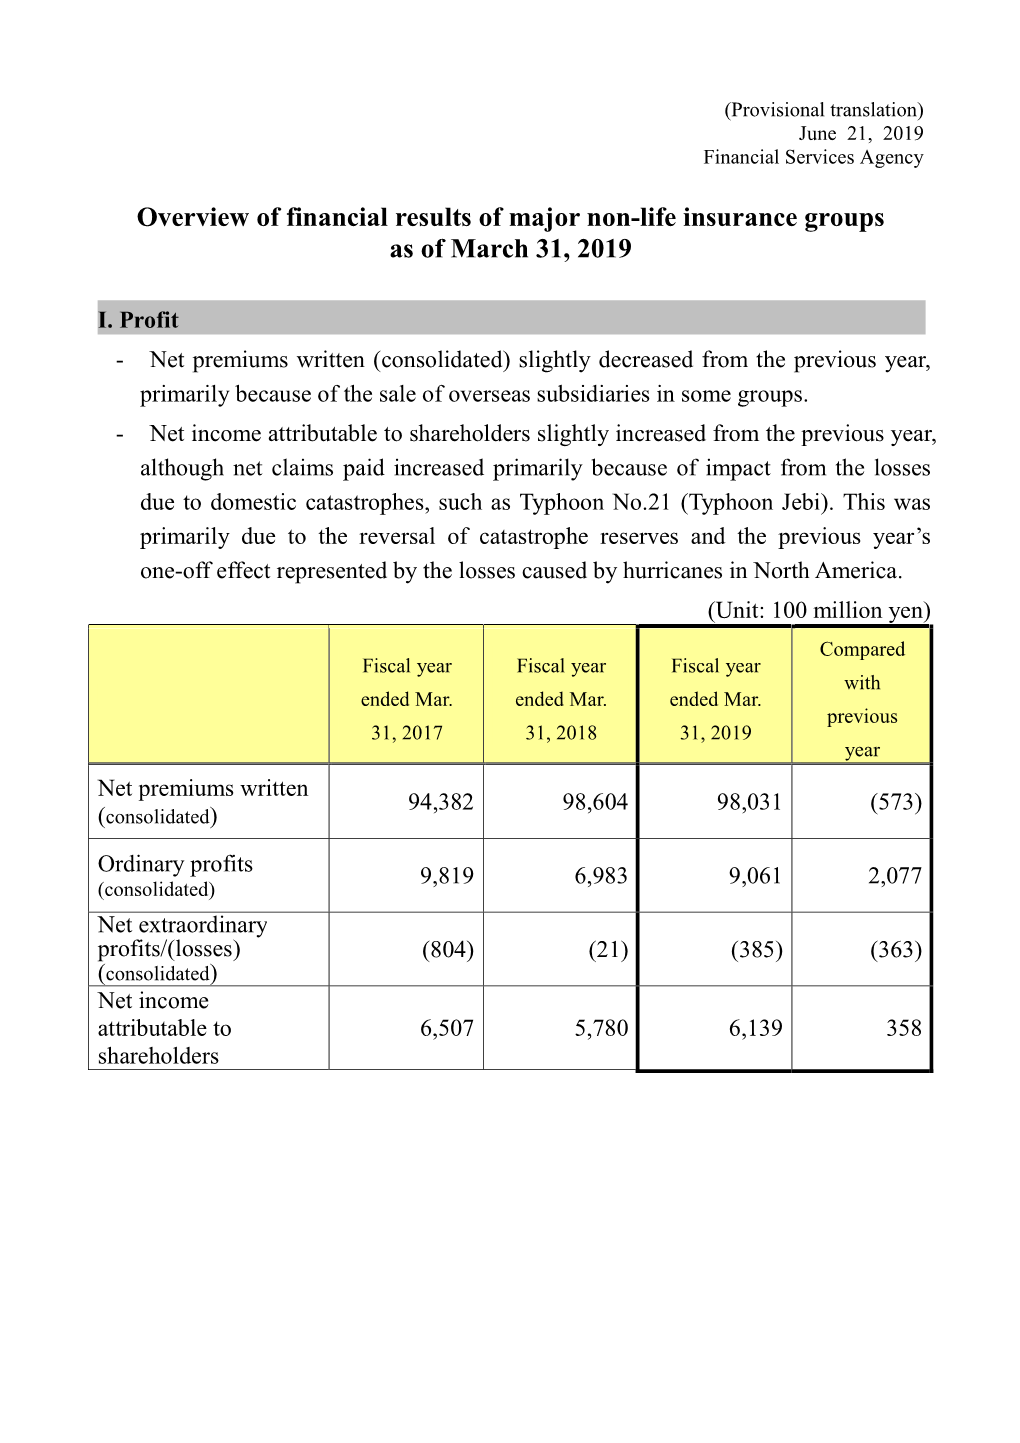 Overview of Financial Results of Major Non-Life Insurance Groups As of March 31, 2019